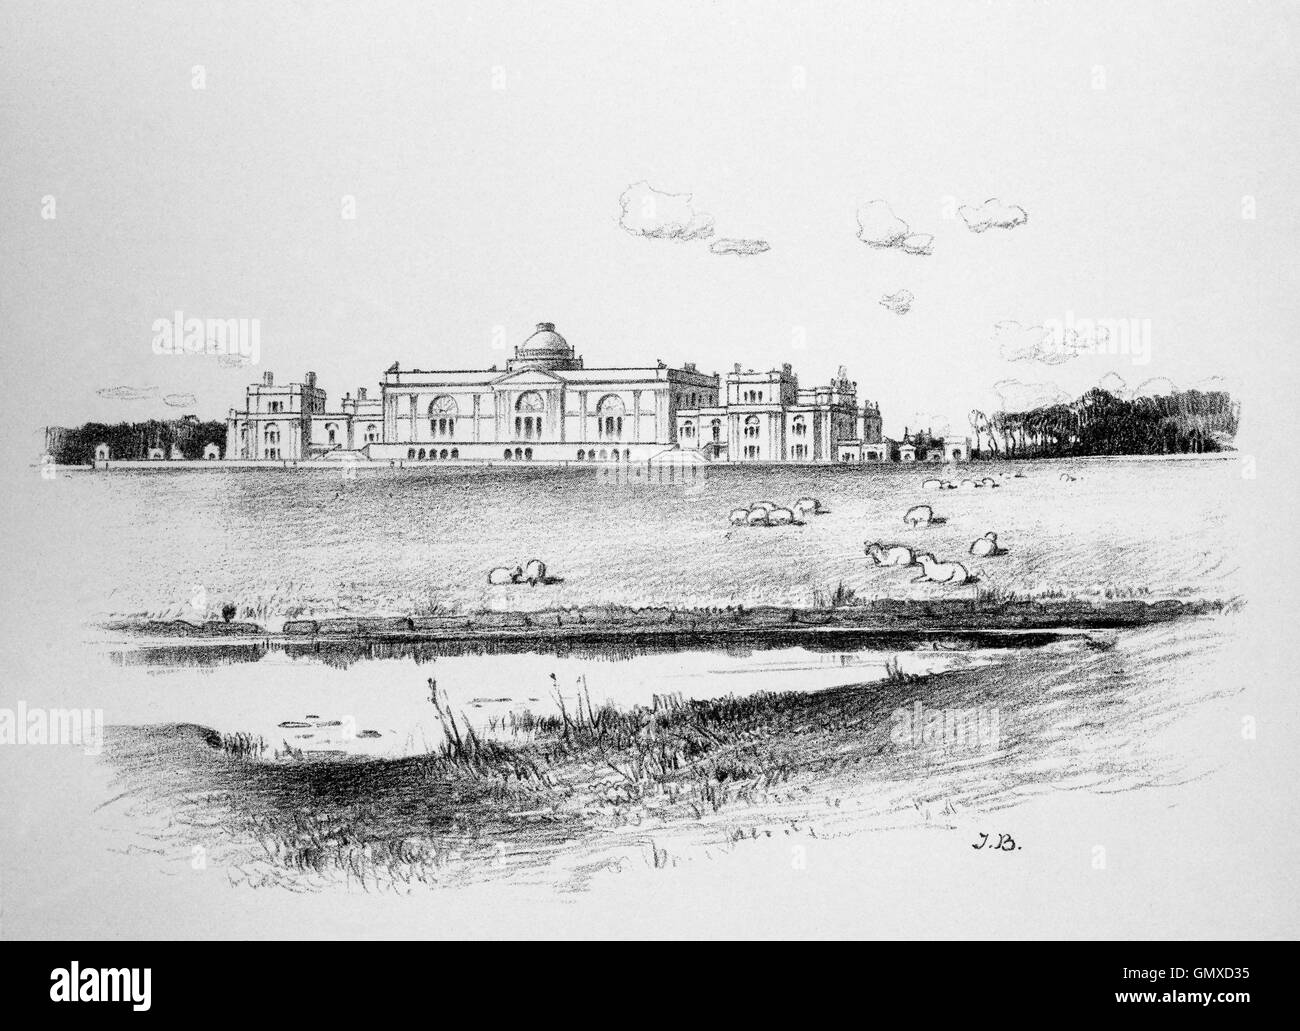 Gosford House built by the 7th Earl of Wemyss between 1790 and 1800, to plans by the architect Robert Adam and is situated near Longniddry in East Lothian, Scotland. (From 'Sketches in East Lothian' by Thomas B. Blacklock...1892) Stock Photo